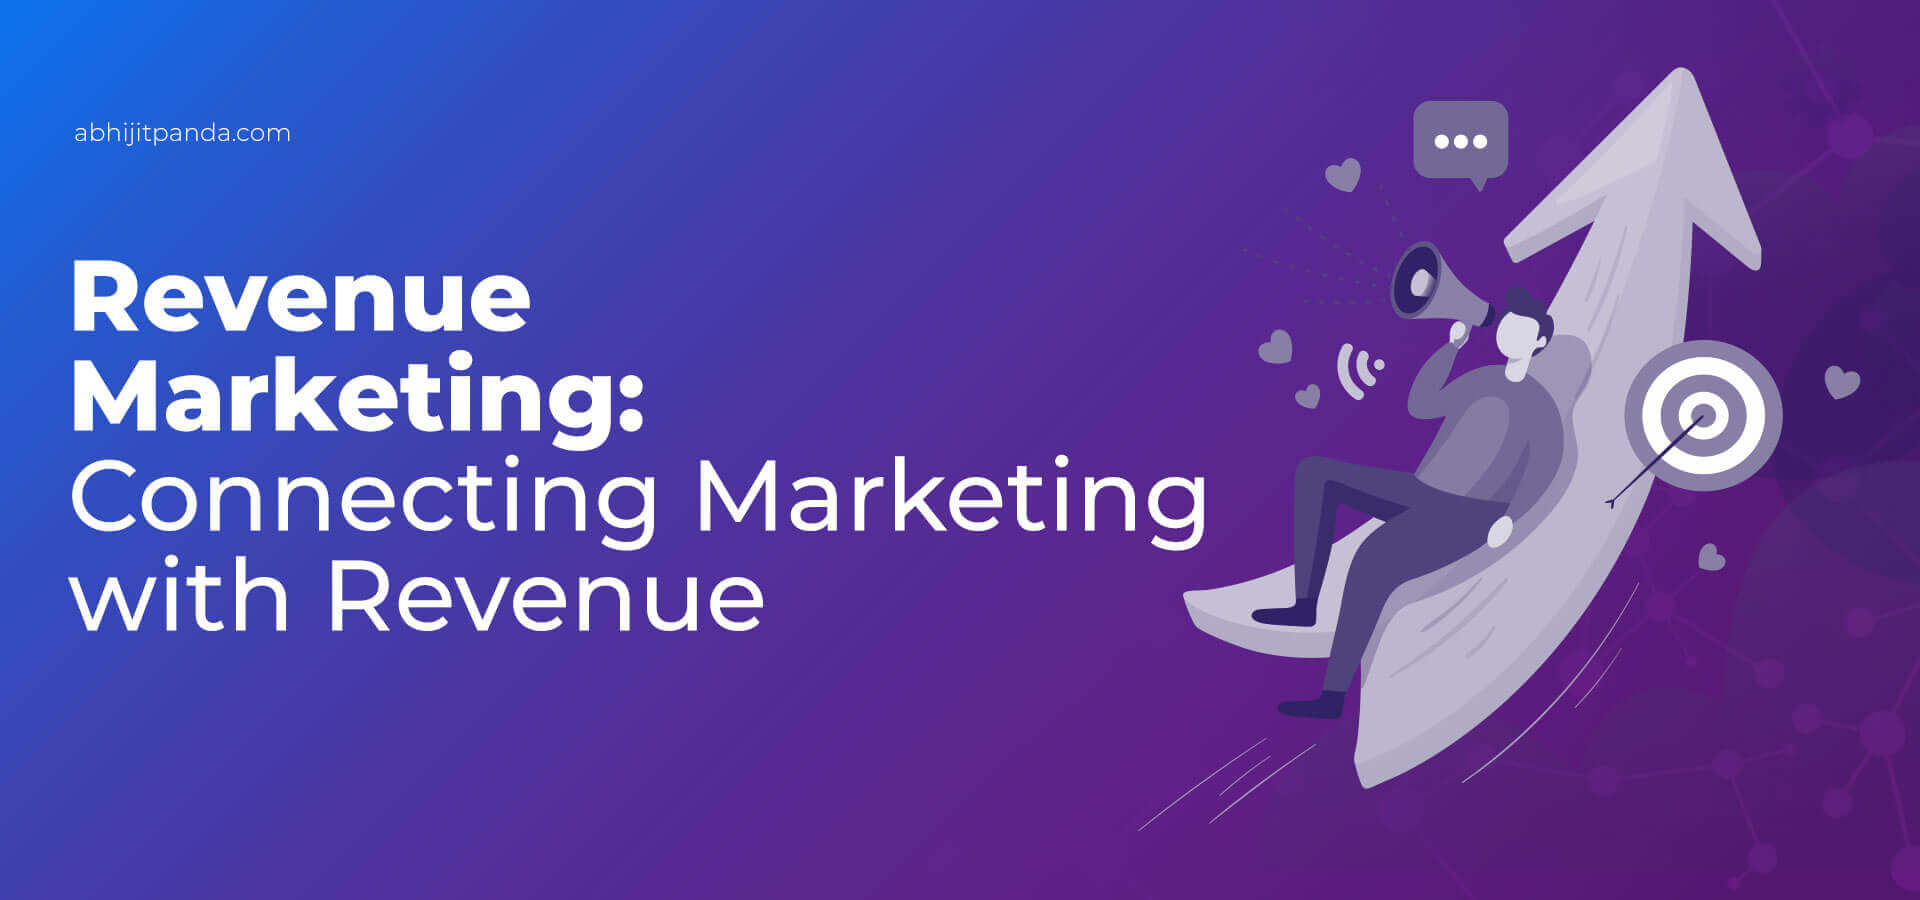 Revenue Marketing: Connecting Marketing with Revenue